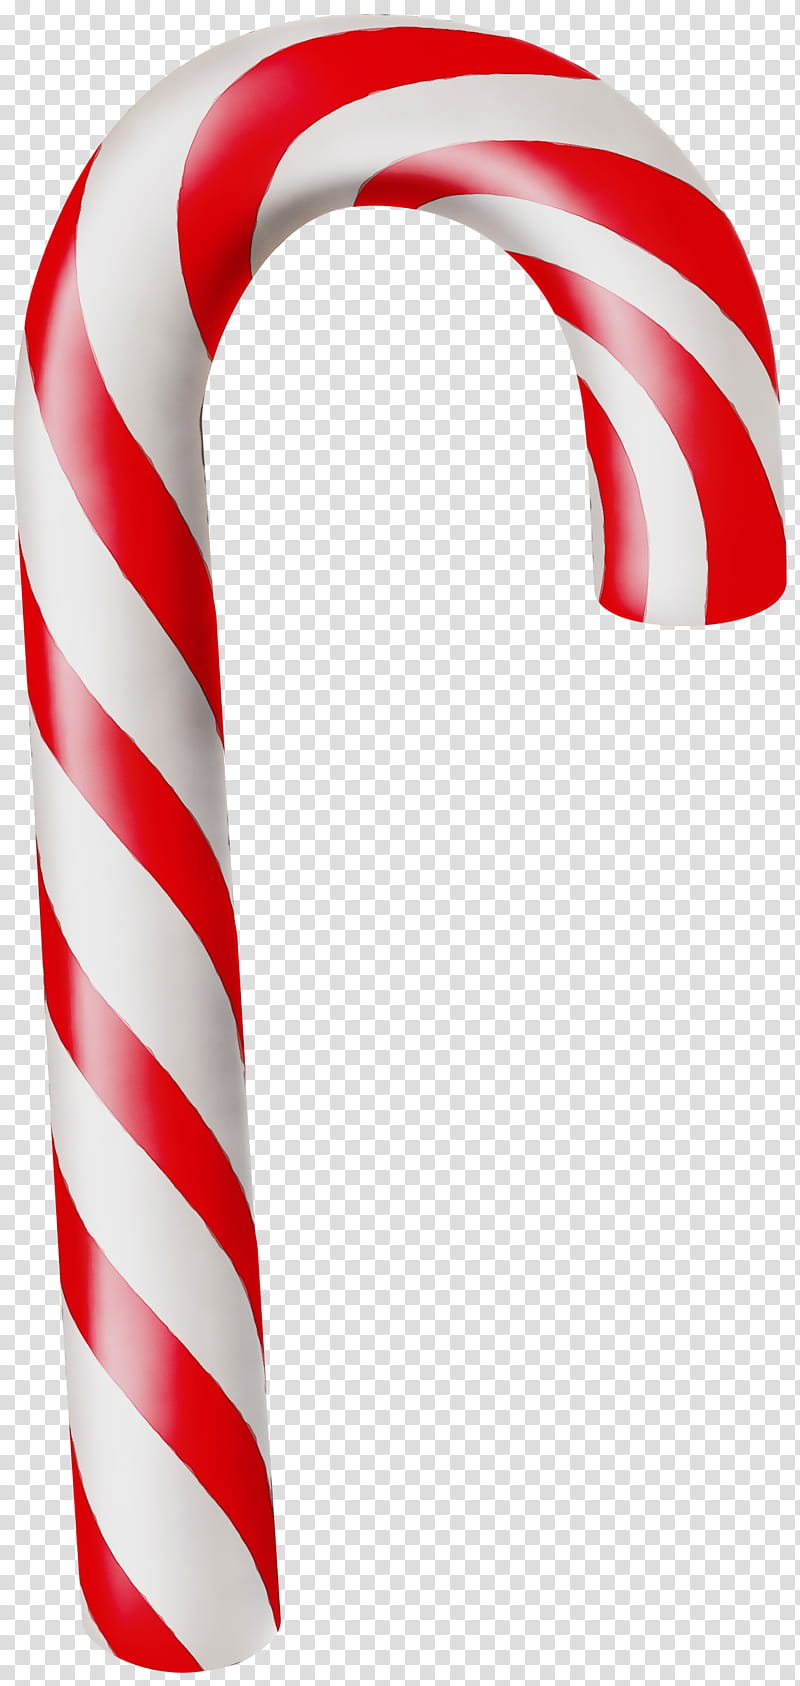 Candy cane, Watercolor, Paint, Wet Ink, Polkagris, Christmas , Holiday, Event transparent background PNG clipart